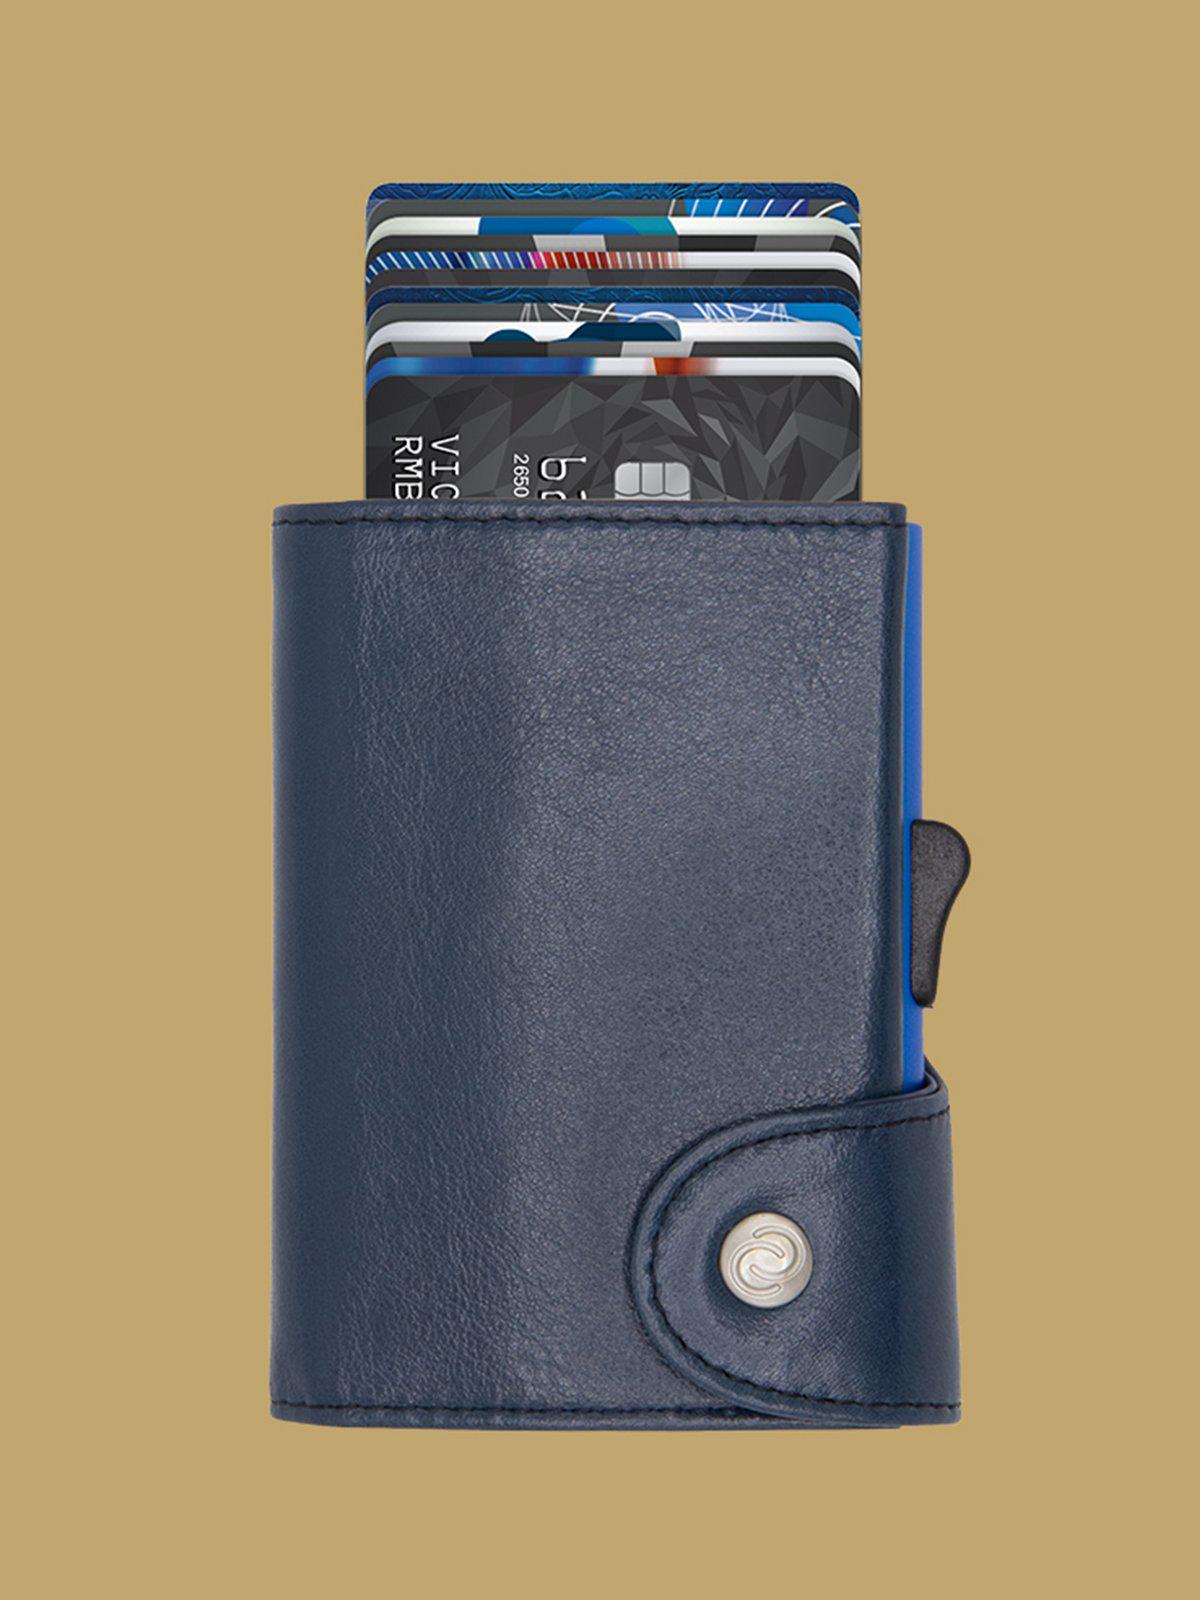 C-Secure XL Italian Leather Wallet with Coin Pouch RFID Cobalto Blue - MORE by Morello Indonesia